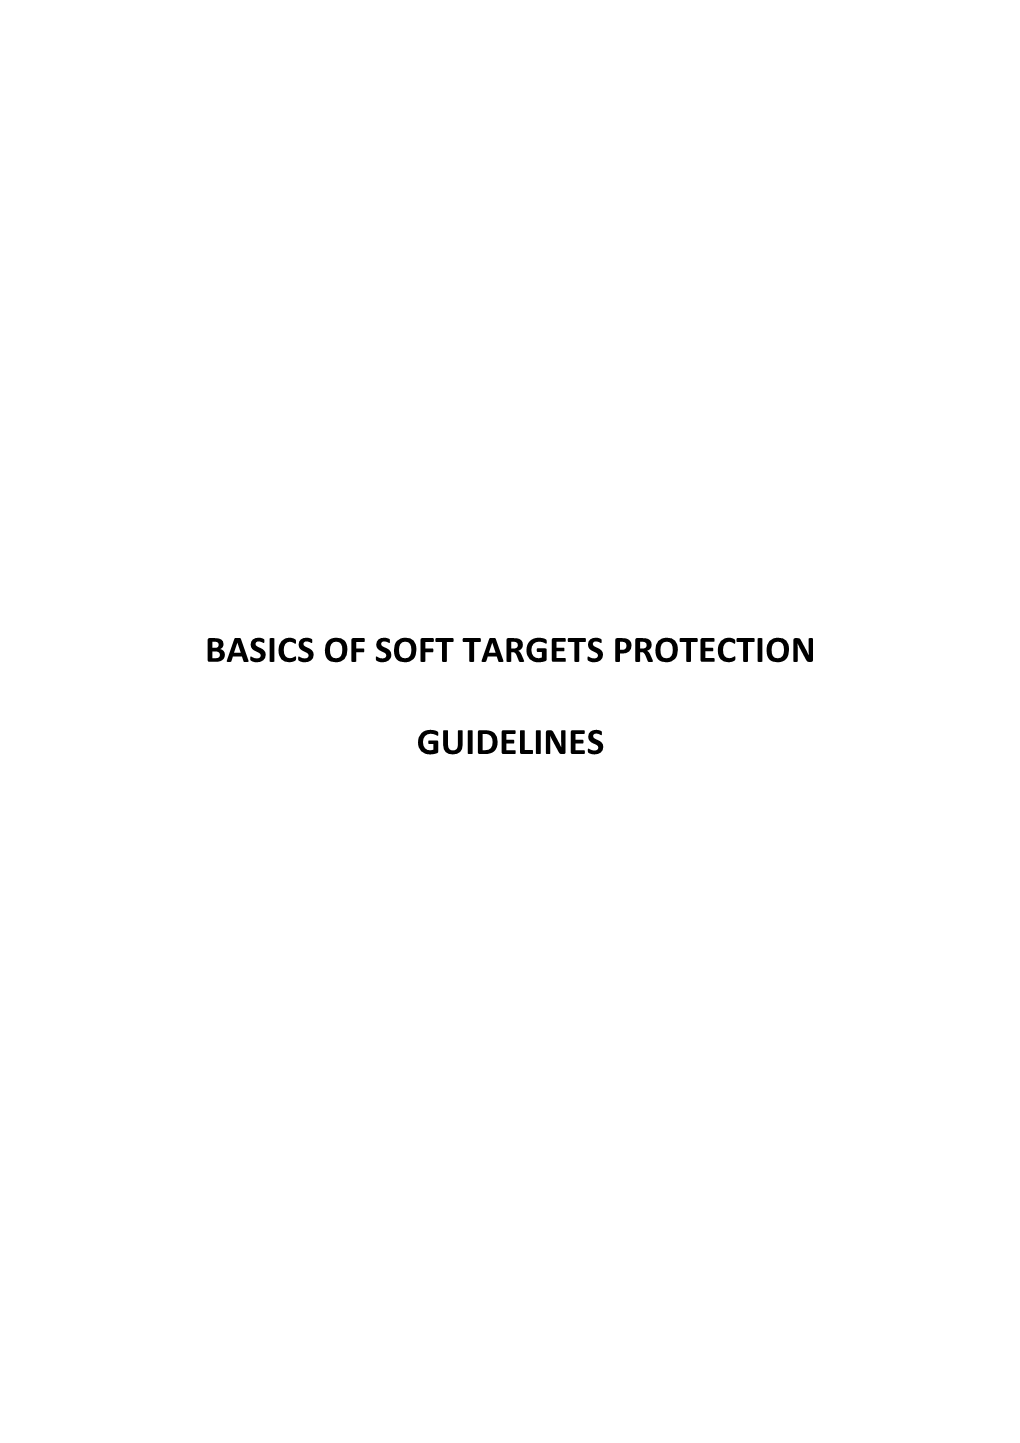 Basics of Soft Targets Protection Guidelines